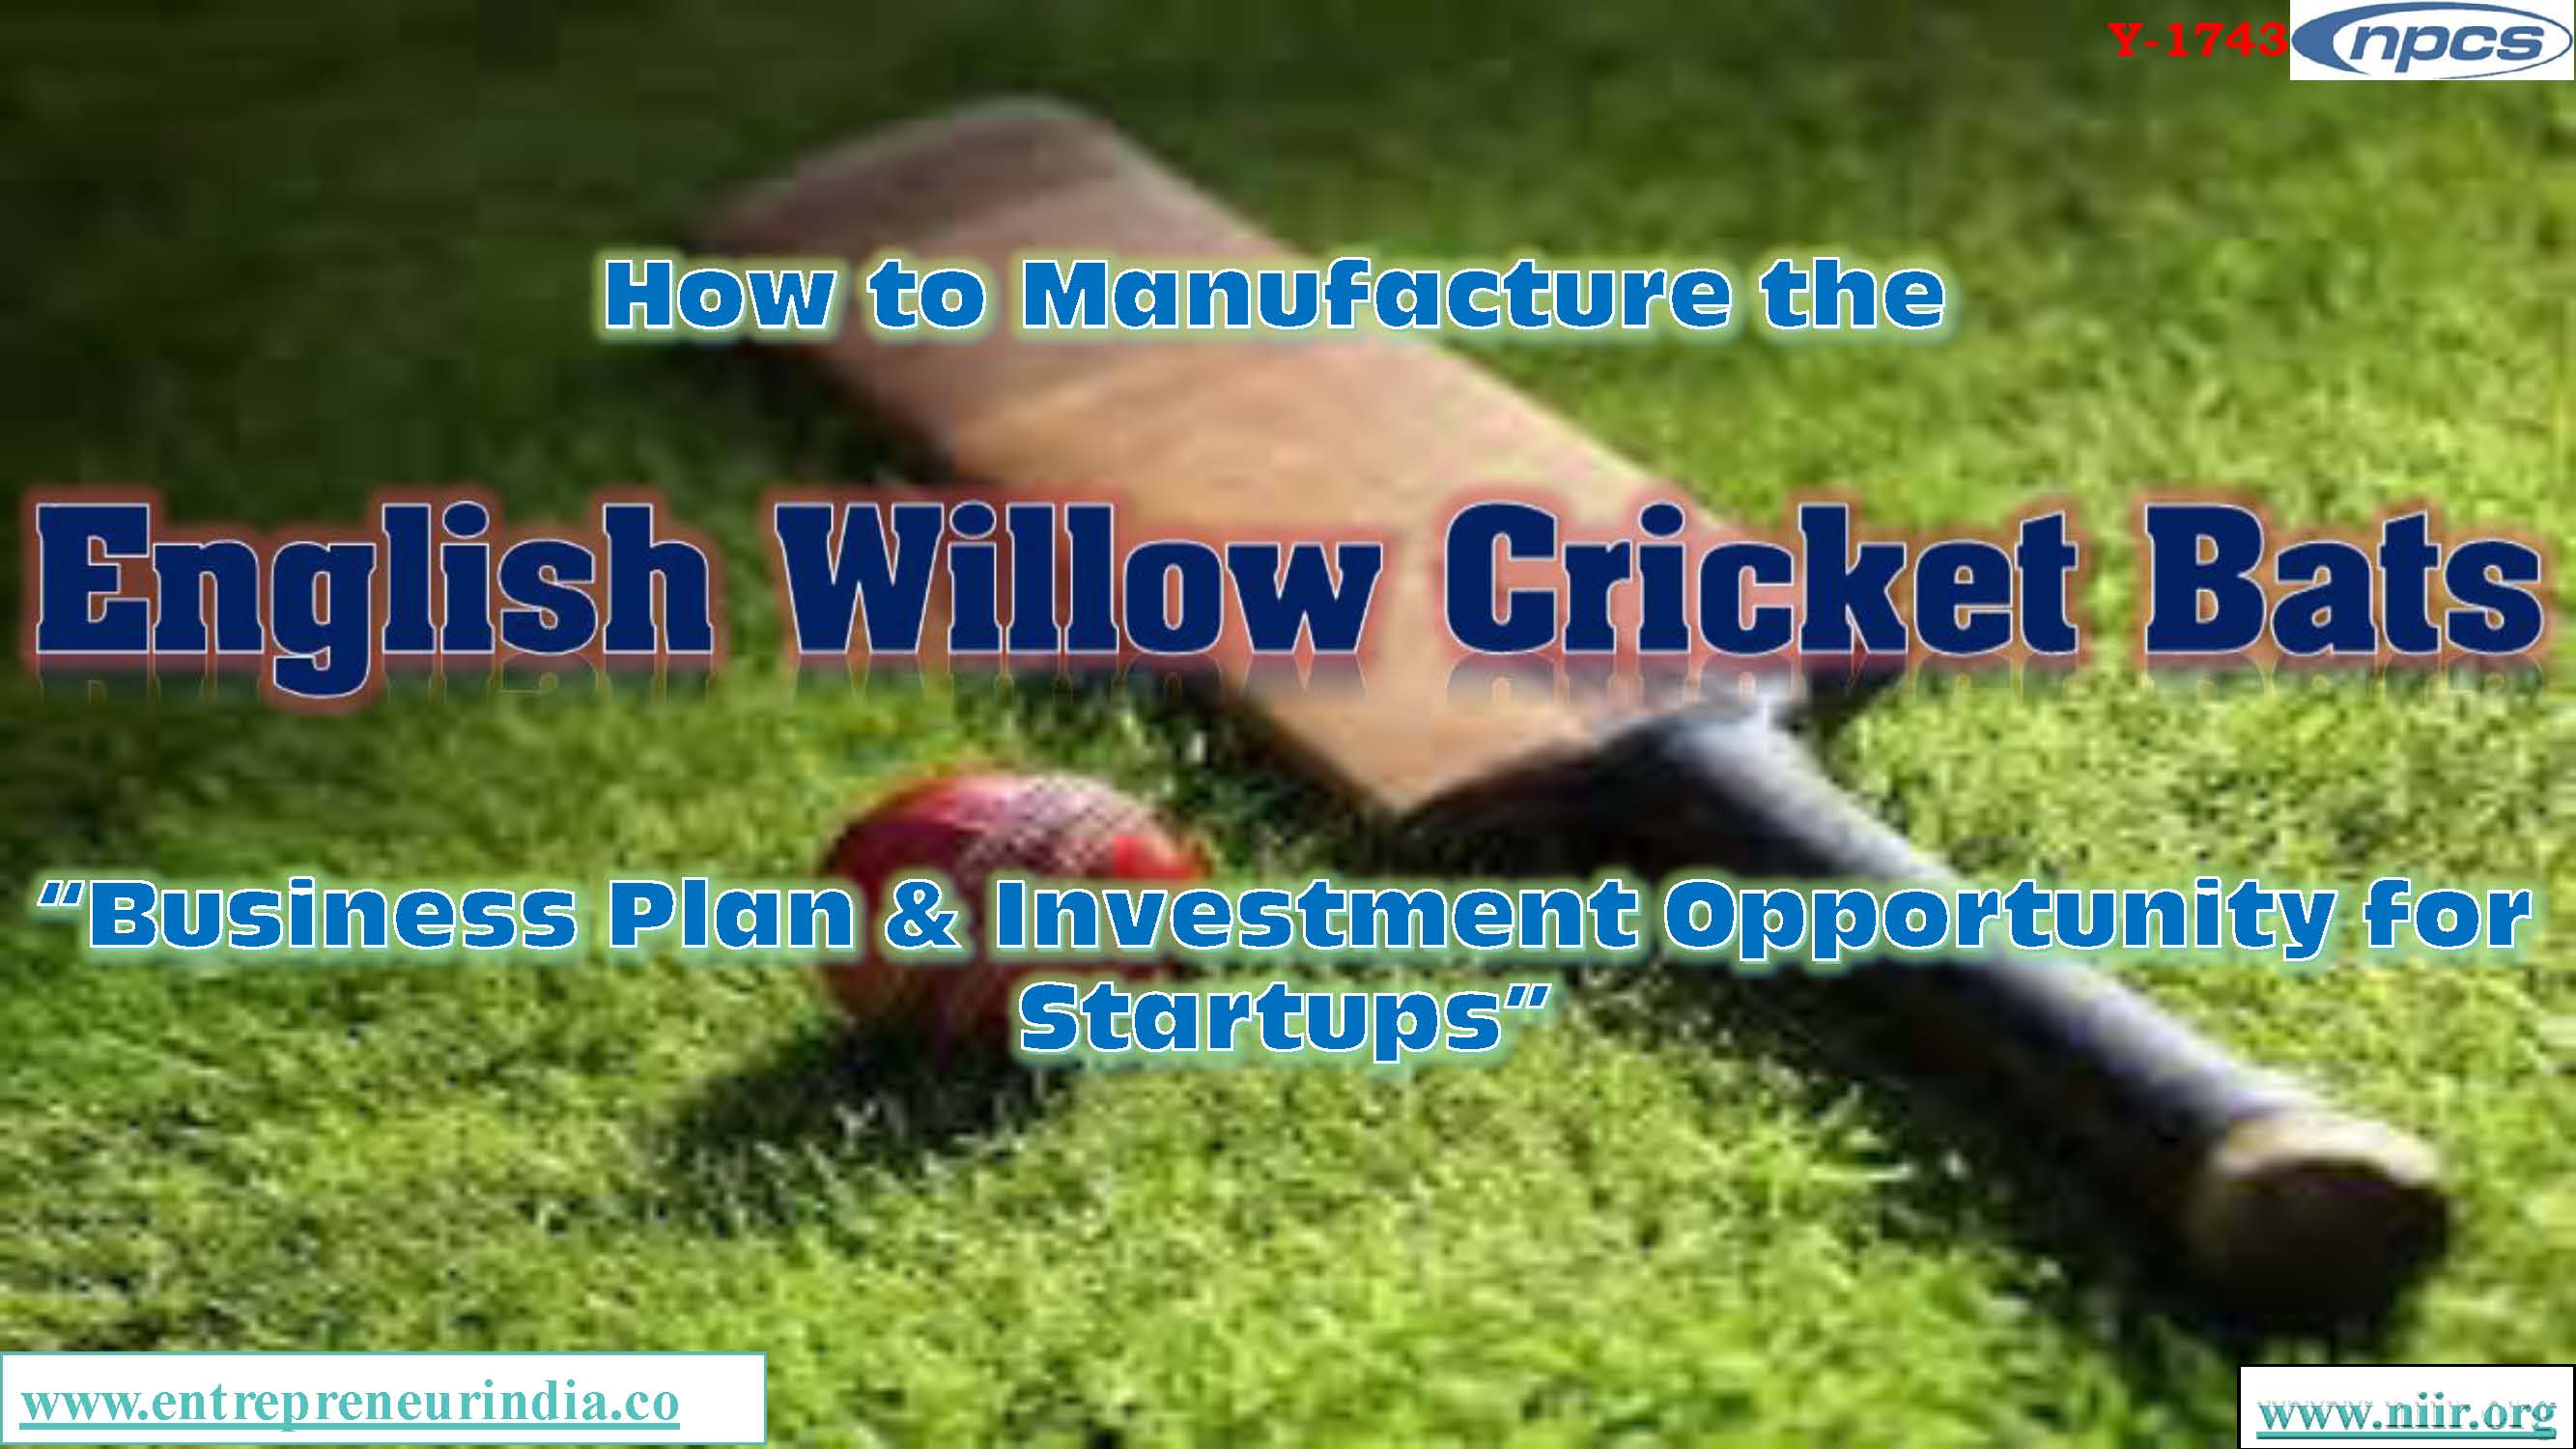 How to Manufacture the English Willow Cricket Bats Business Plan and Investment Opportunity for Startups